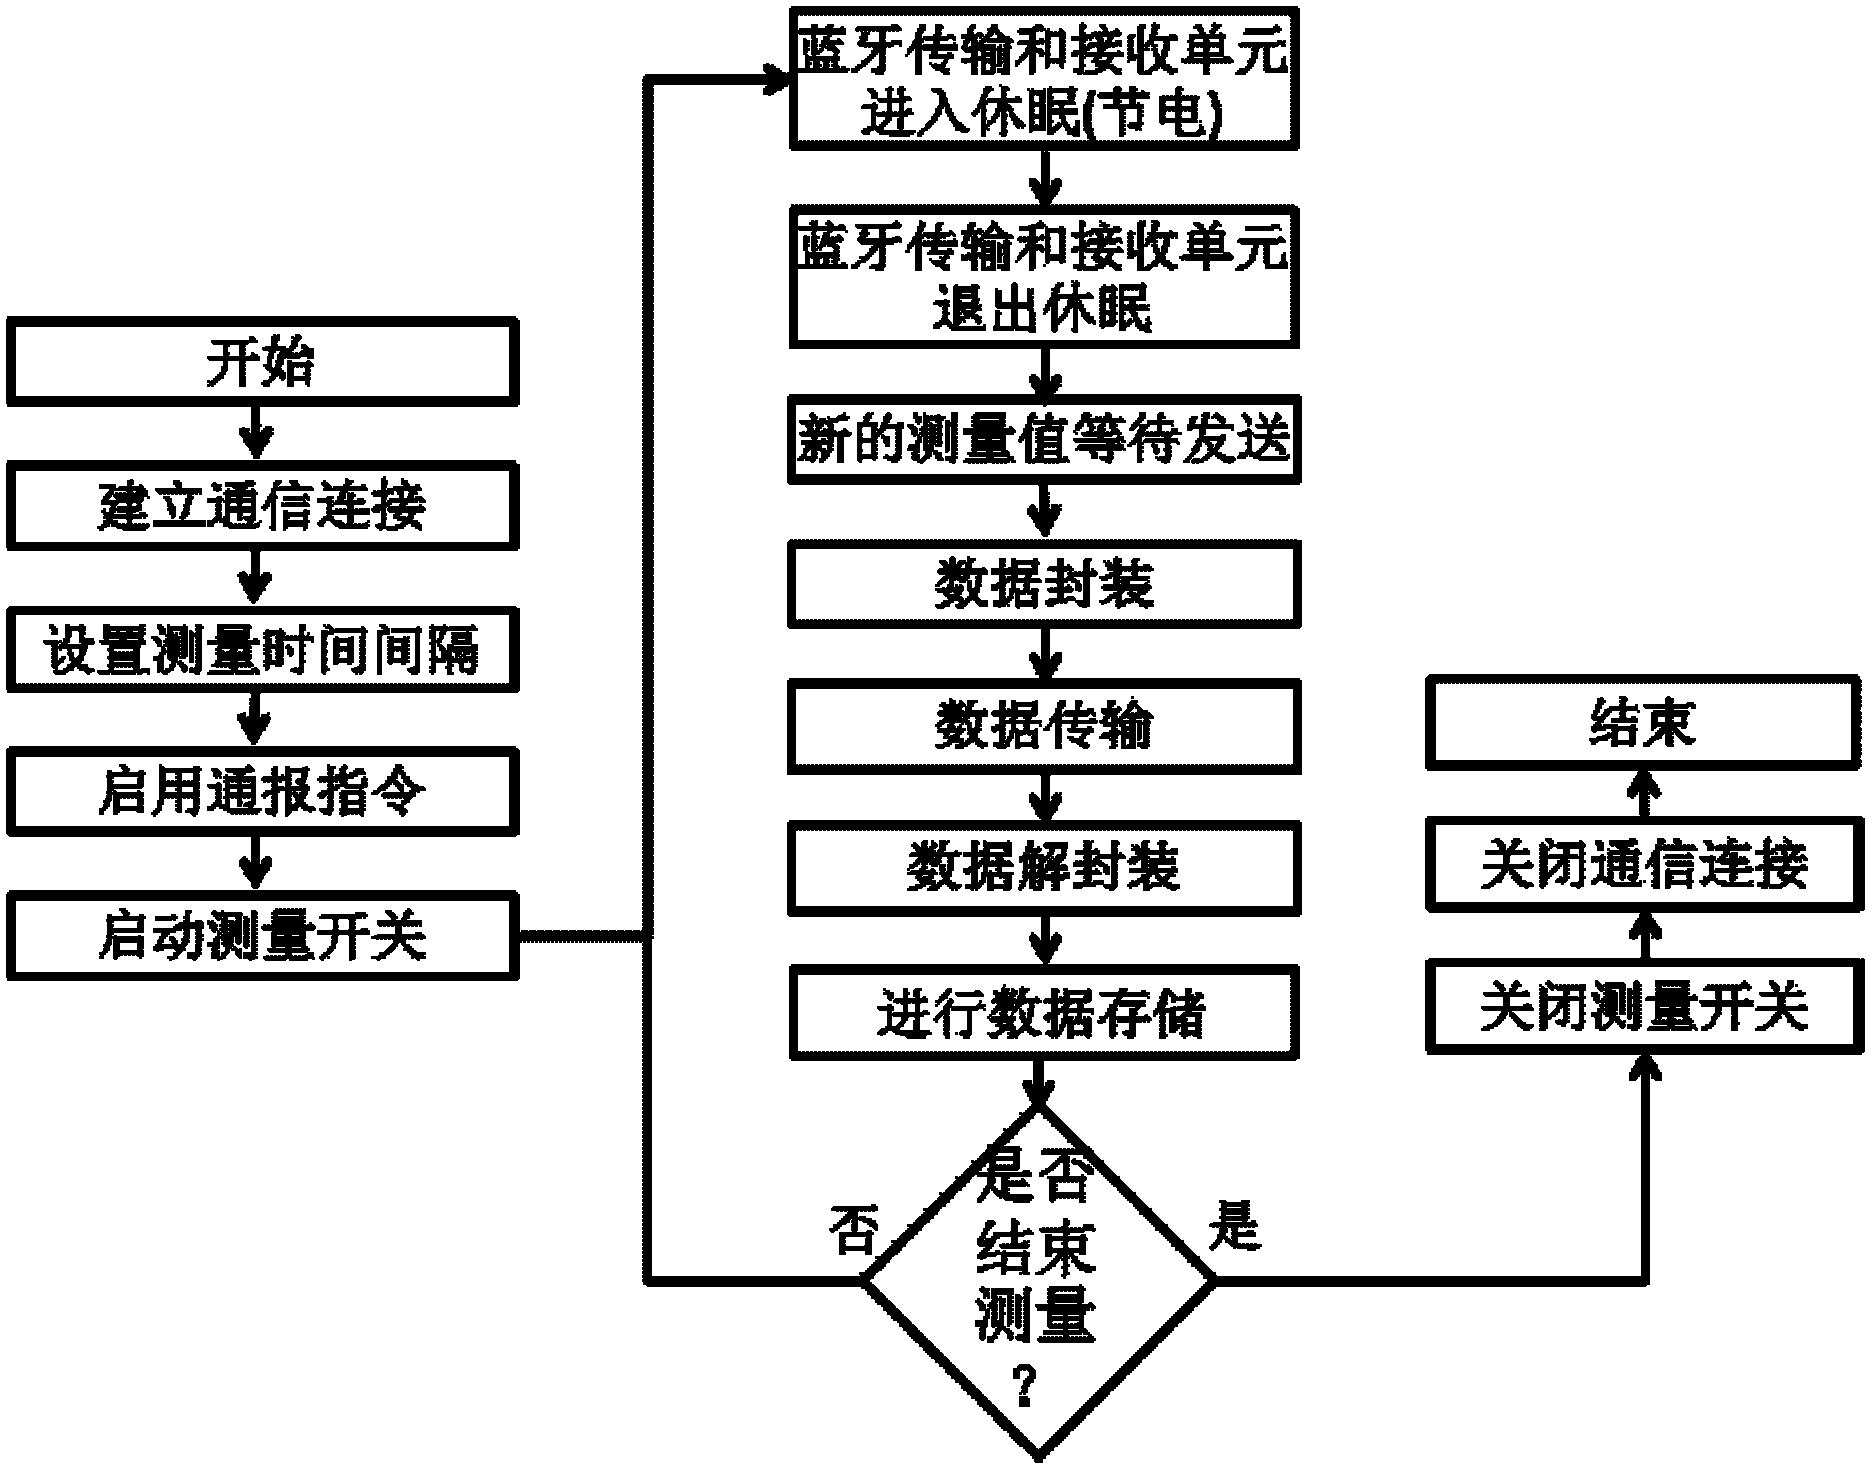 Rope-skipping process data format set and transmission method for rope-skipping process data format set based on Bluetooth low power consumption technology